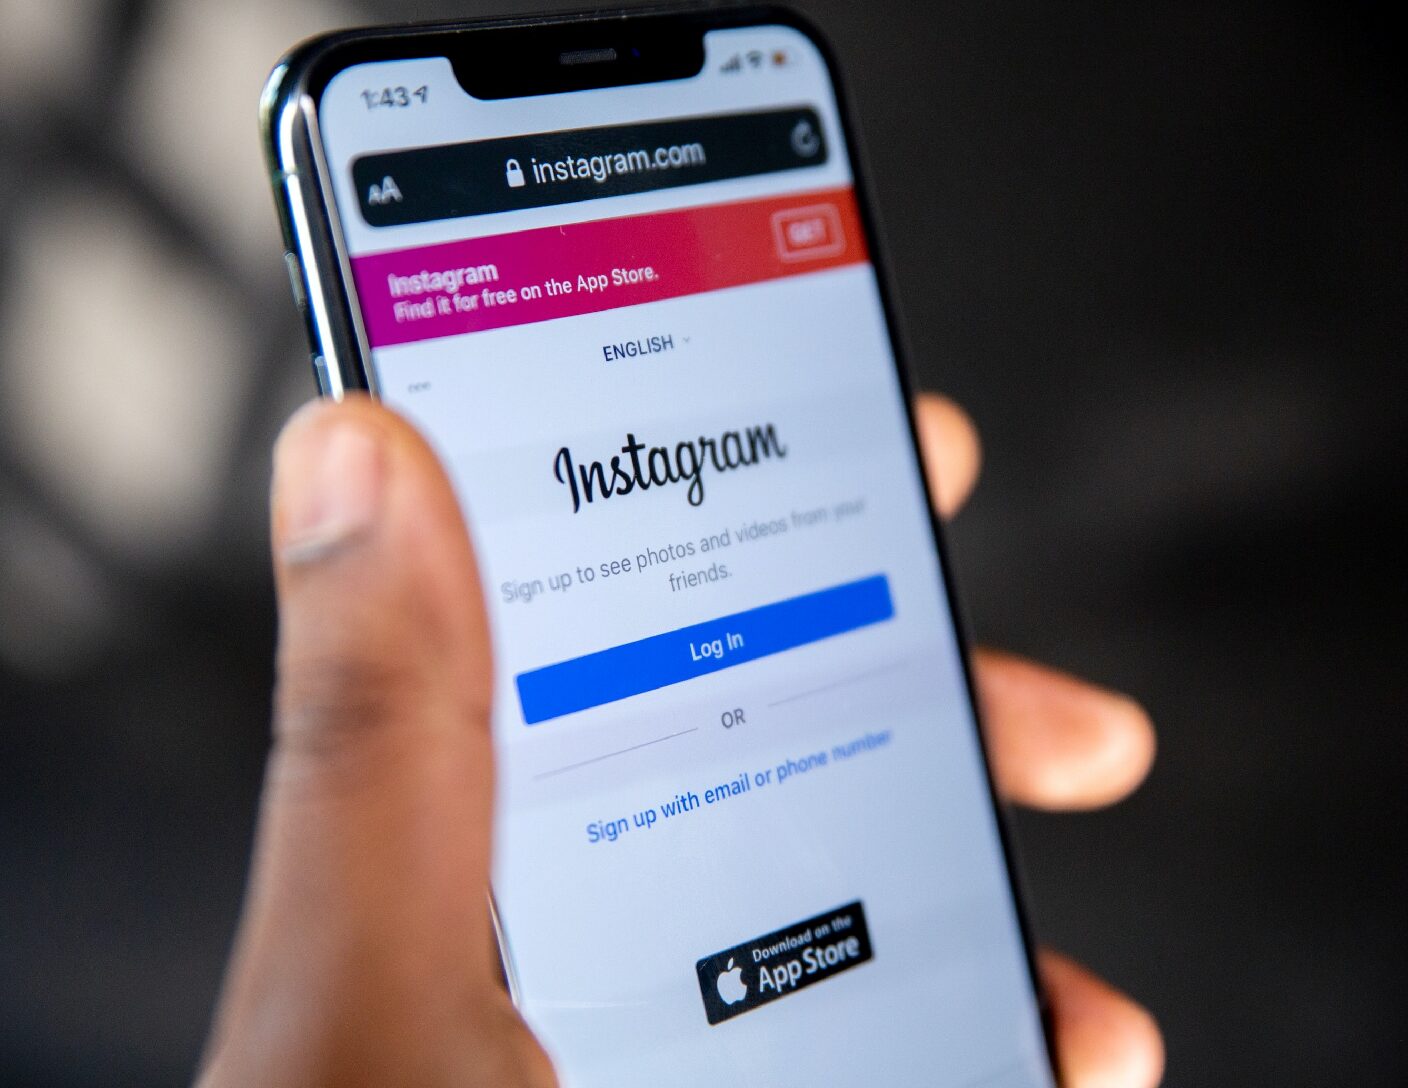 Instagram account and users safety is compromised, which can cause headaches and problems for users. 